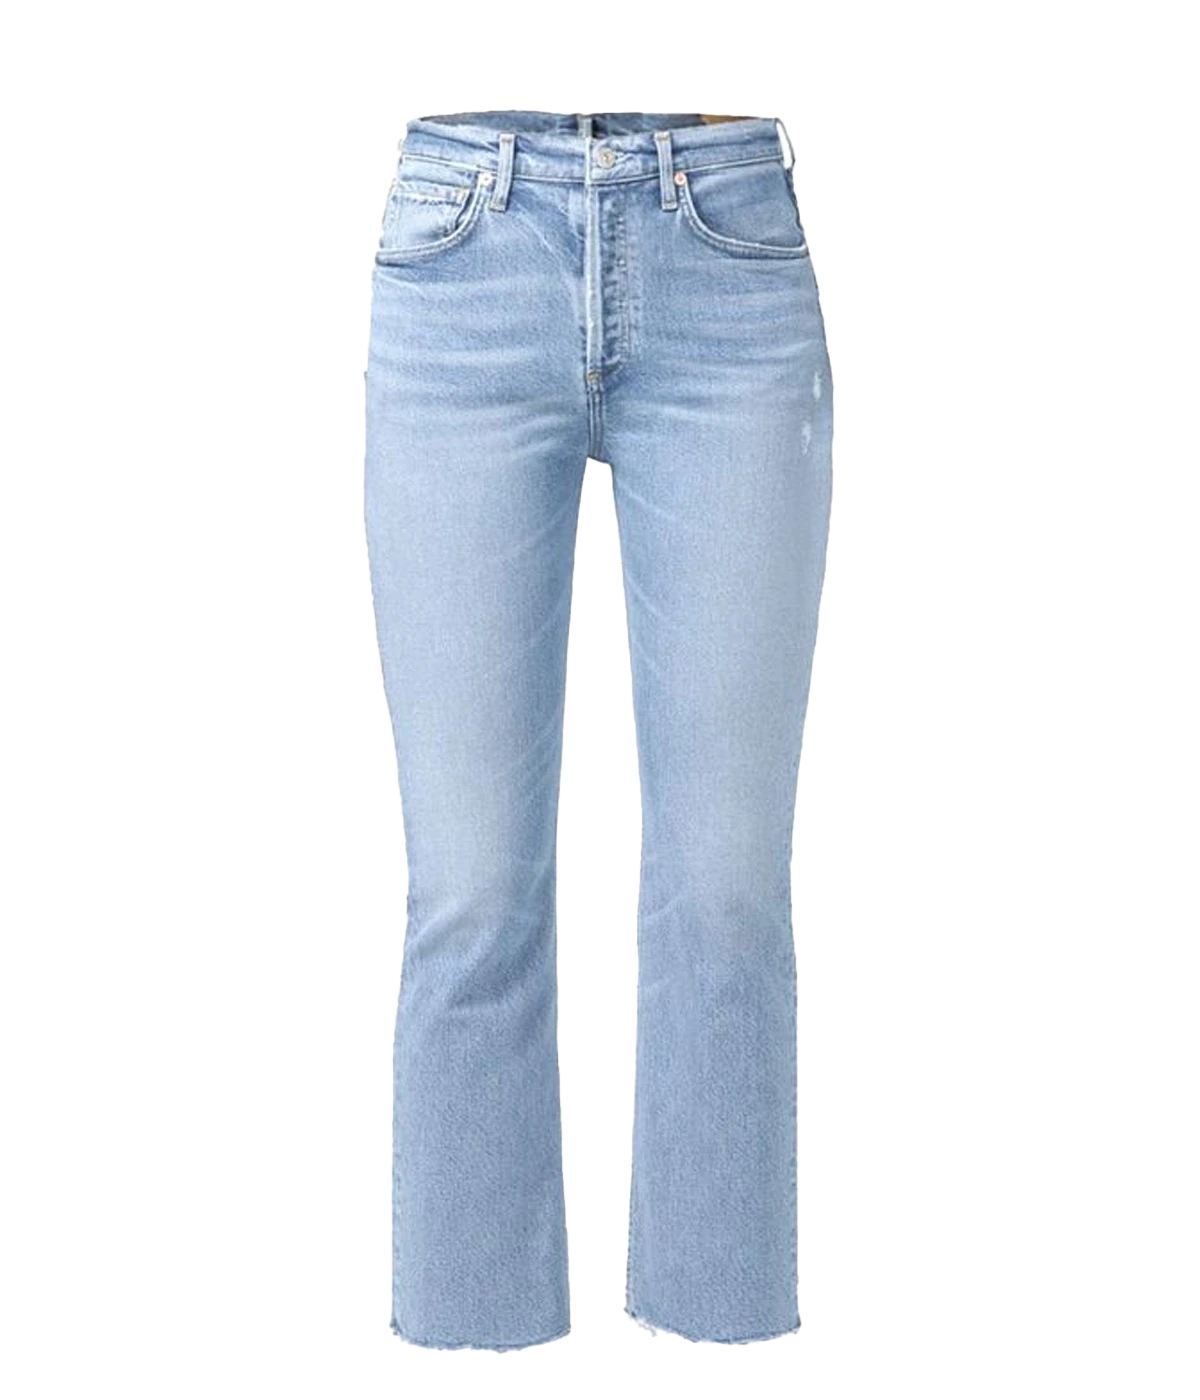 Isola Cropped Boot Jean in Blue Moon